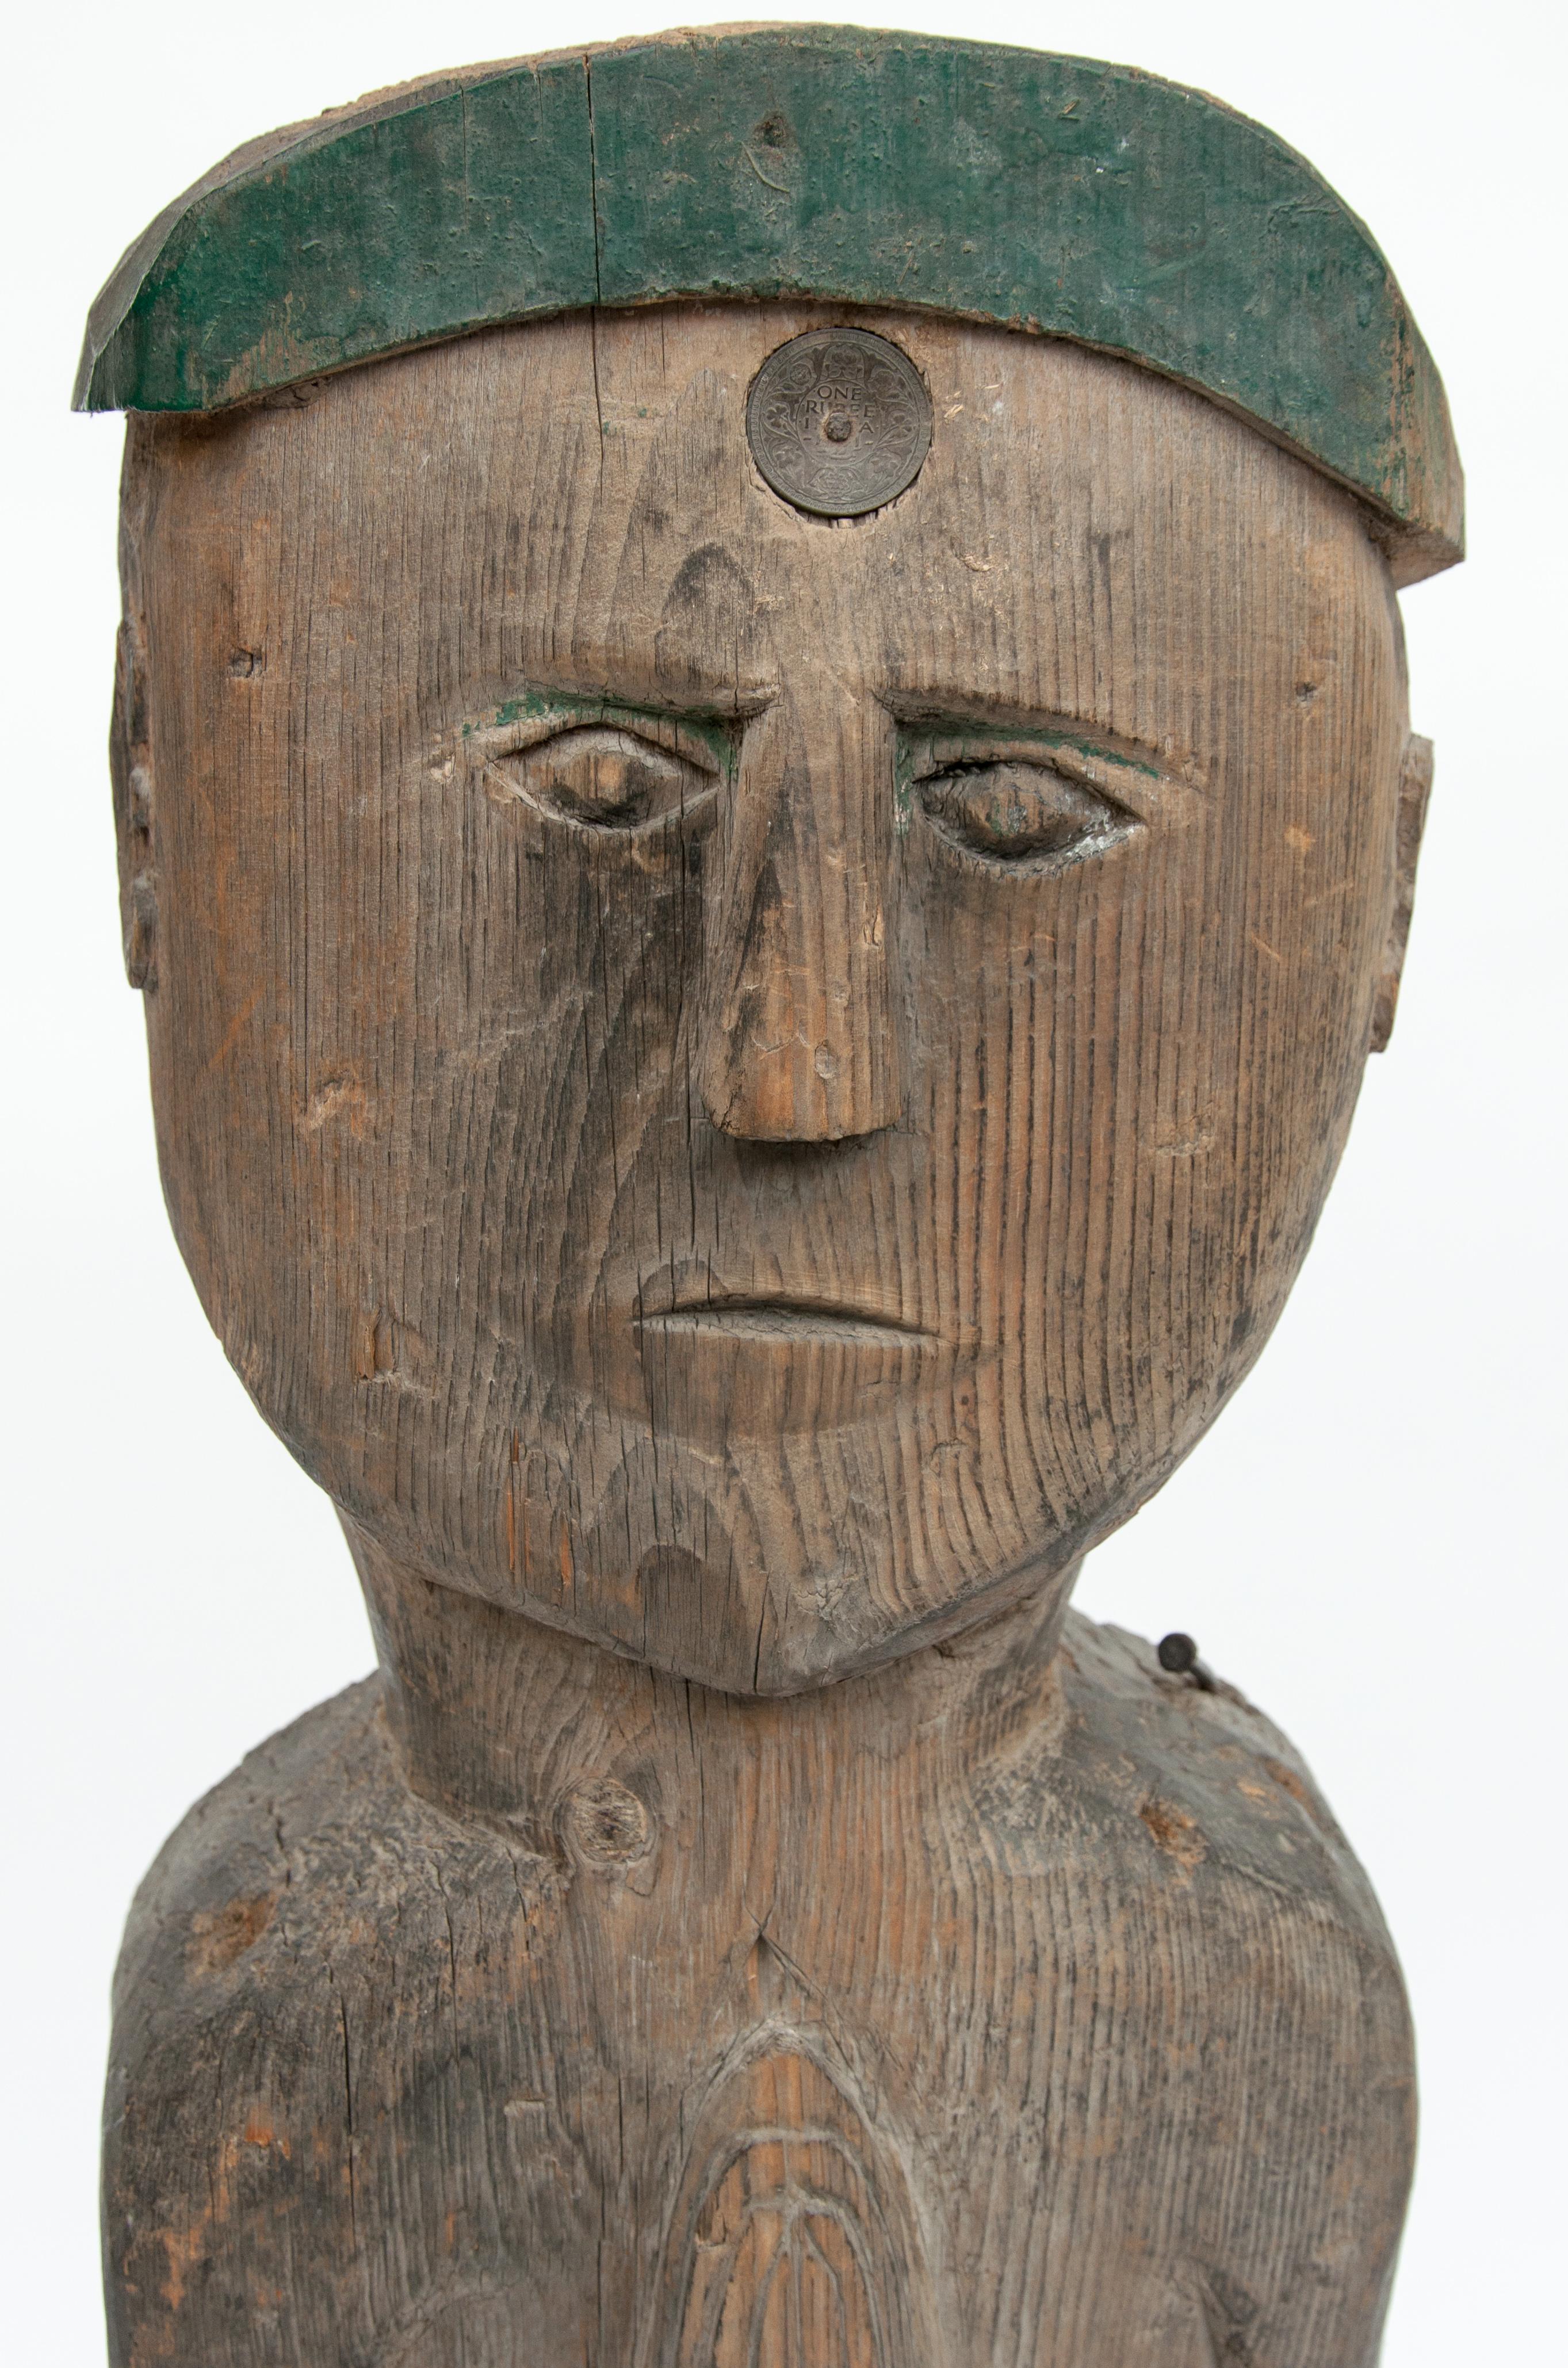 Wooden tribal statue from West Nepal, mid-20th century. Steel plate base.
This wooden figure comes from West Nepal, most likely from the area of the Karnali river system. He wears a green topi or hat in the shape of the crescent moon and has an old